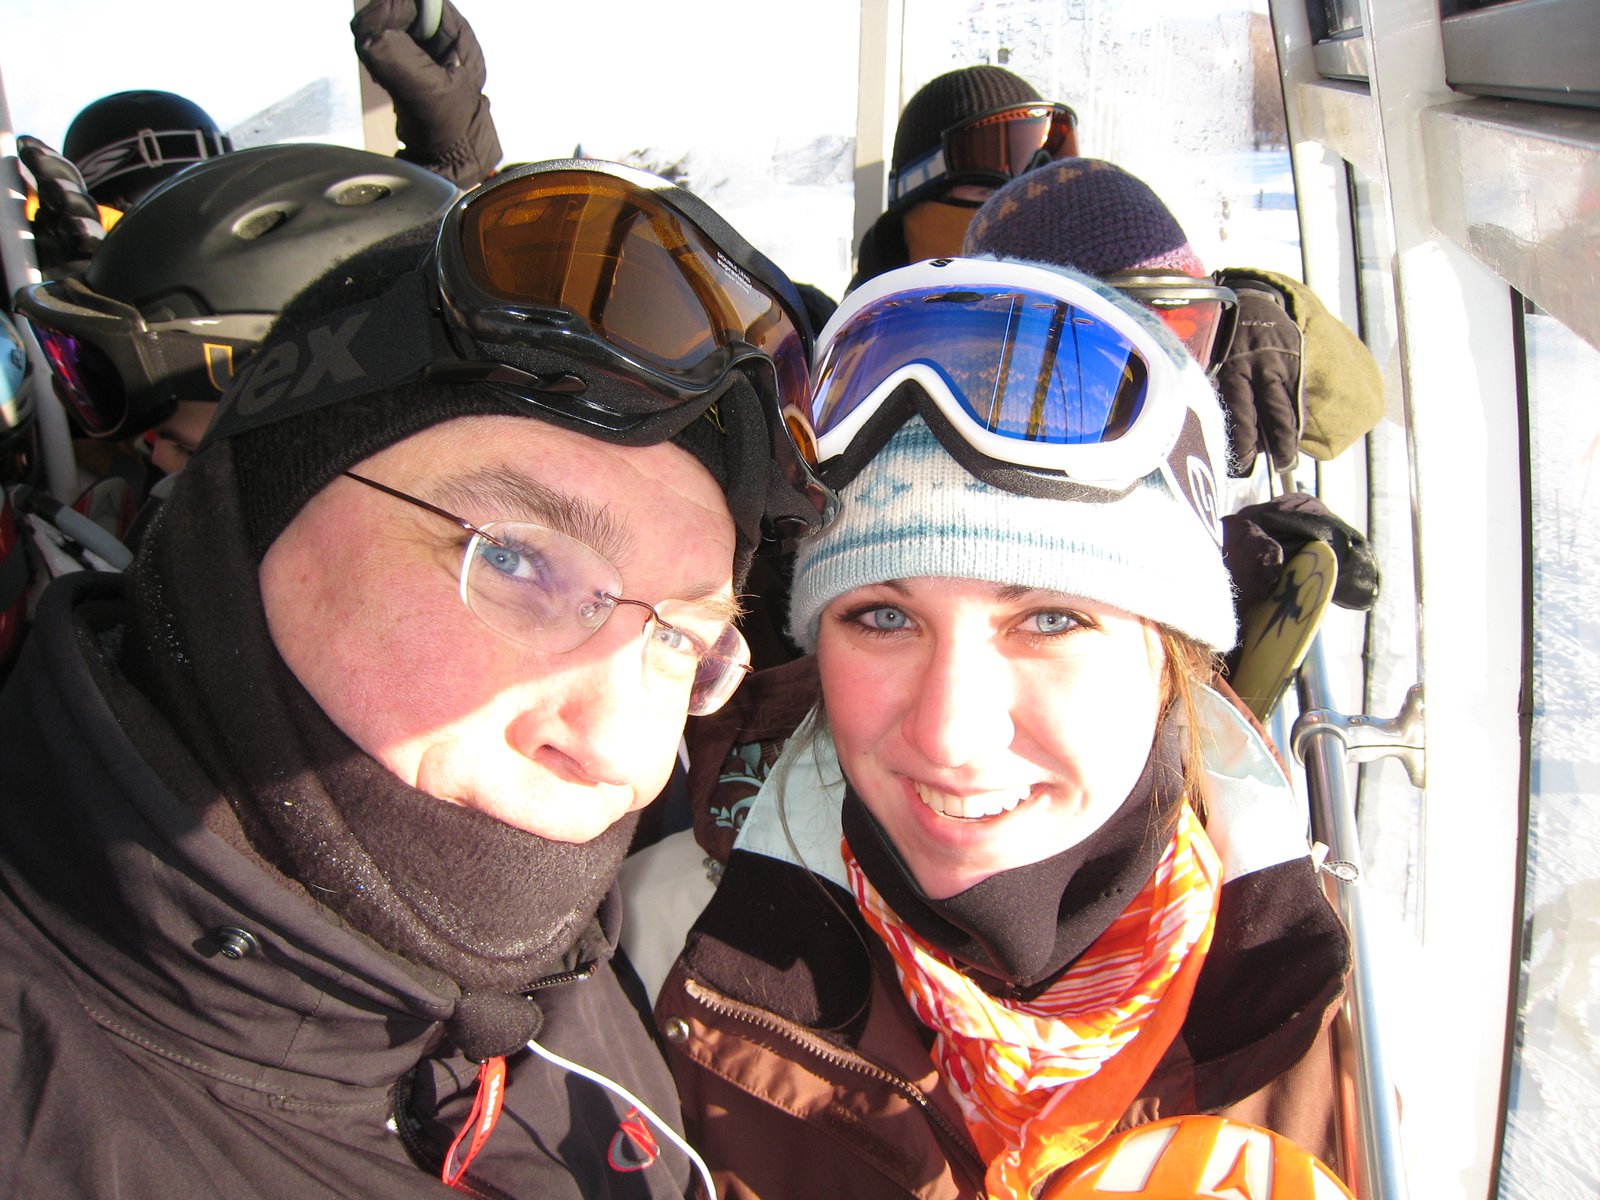 Me and my father, jay peak 07'